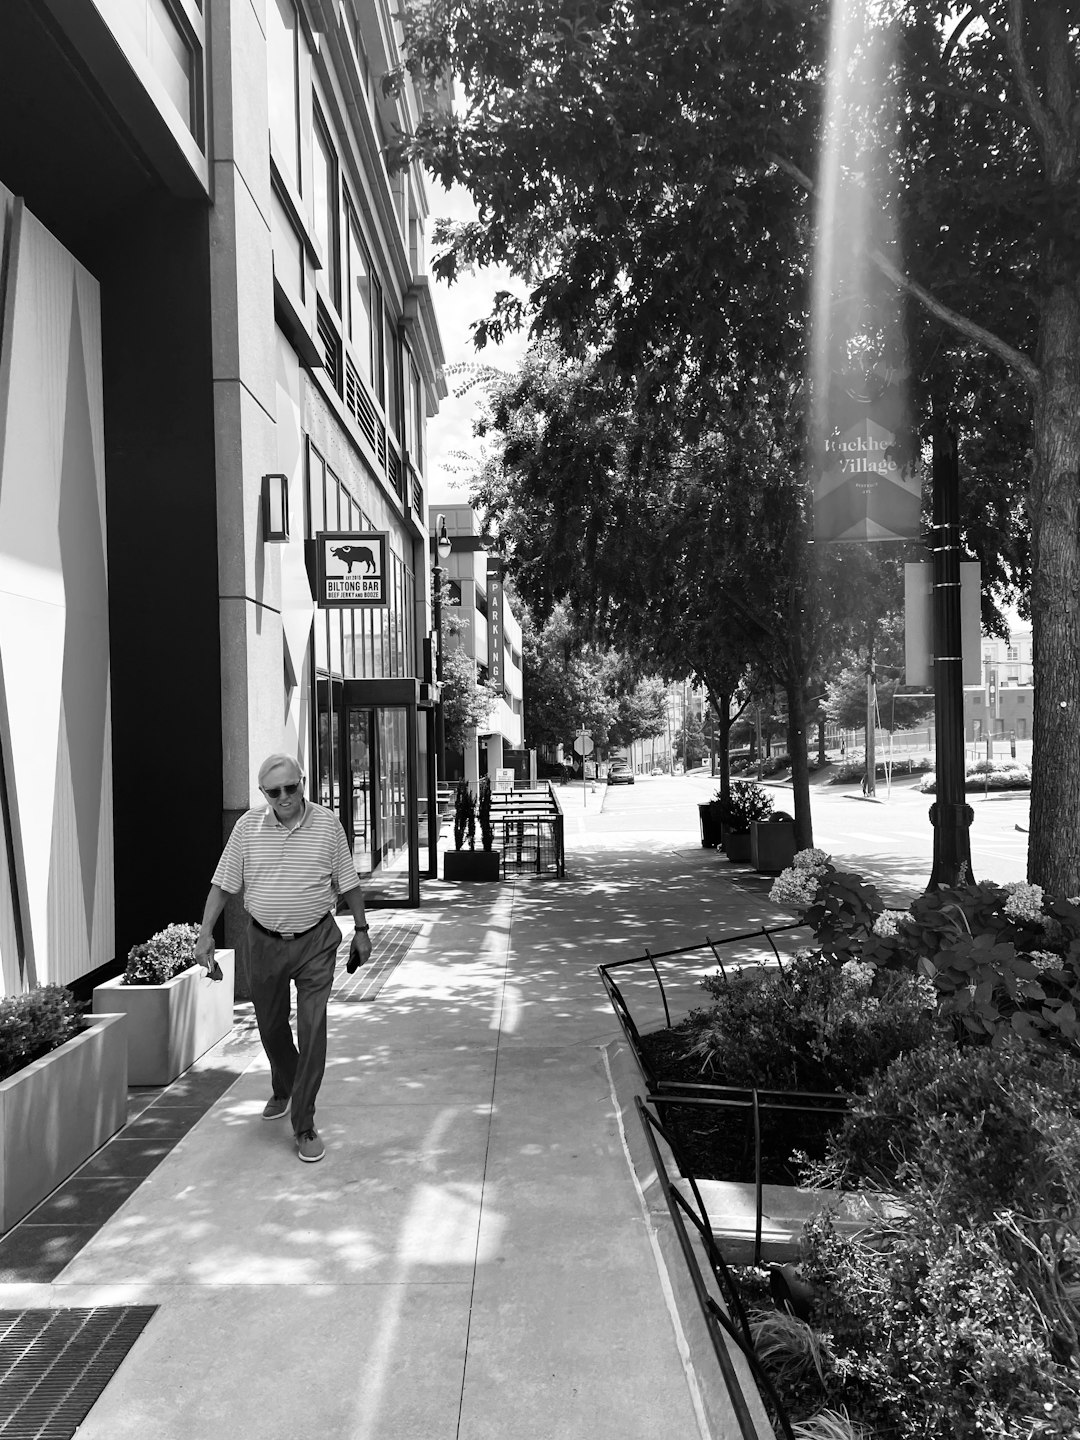 grayscale photo of man in white shirt and black pants walking on sidewalk